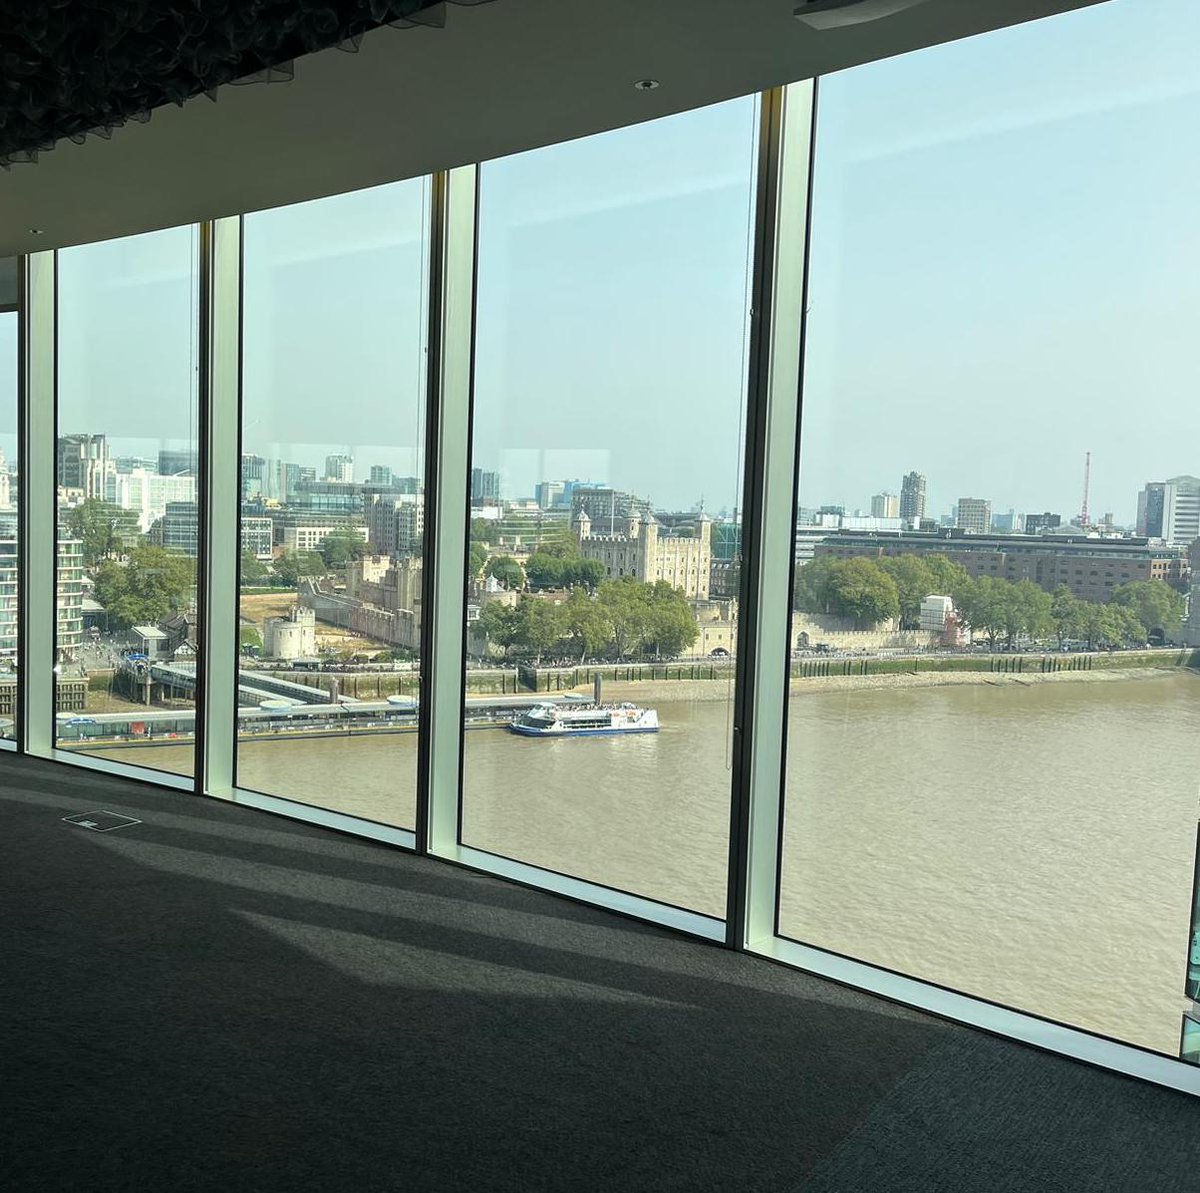 The second action-packed day of our Annual Arbitration & ADR Conference takes place in-person at EY’s iconic office at More London Place tomorrow.   We are looking forward to seeing you soon! @iccwbo @ICC_arbitration #arbitration #ICCCourtat100 #ICCArbConf23